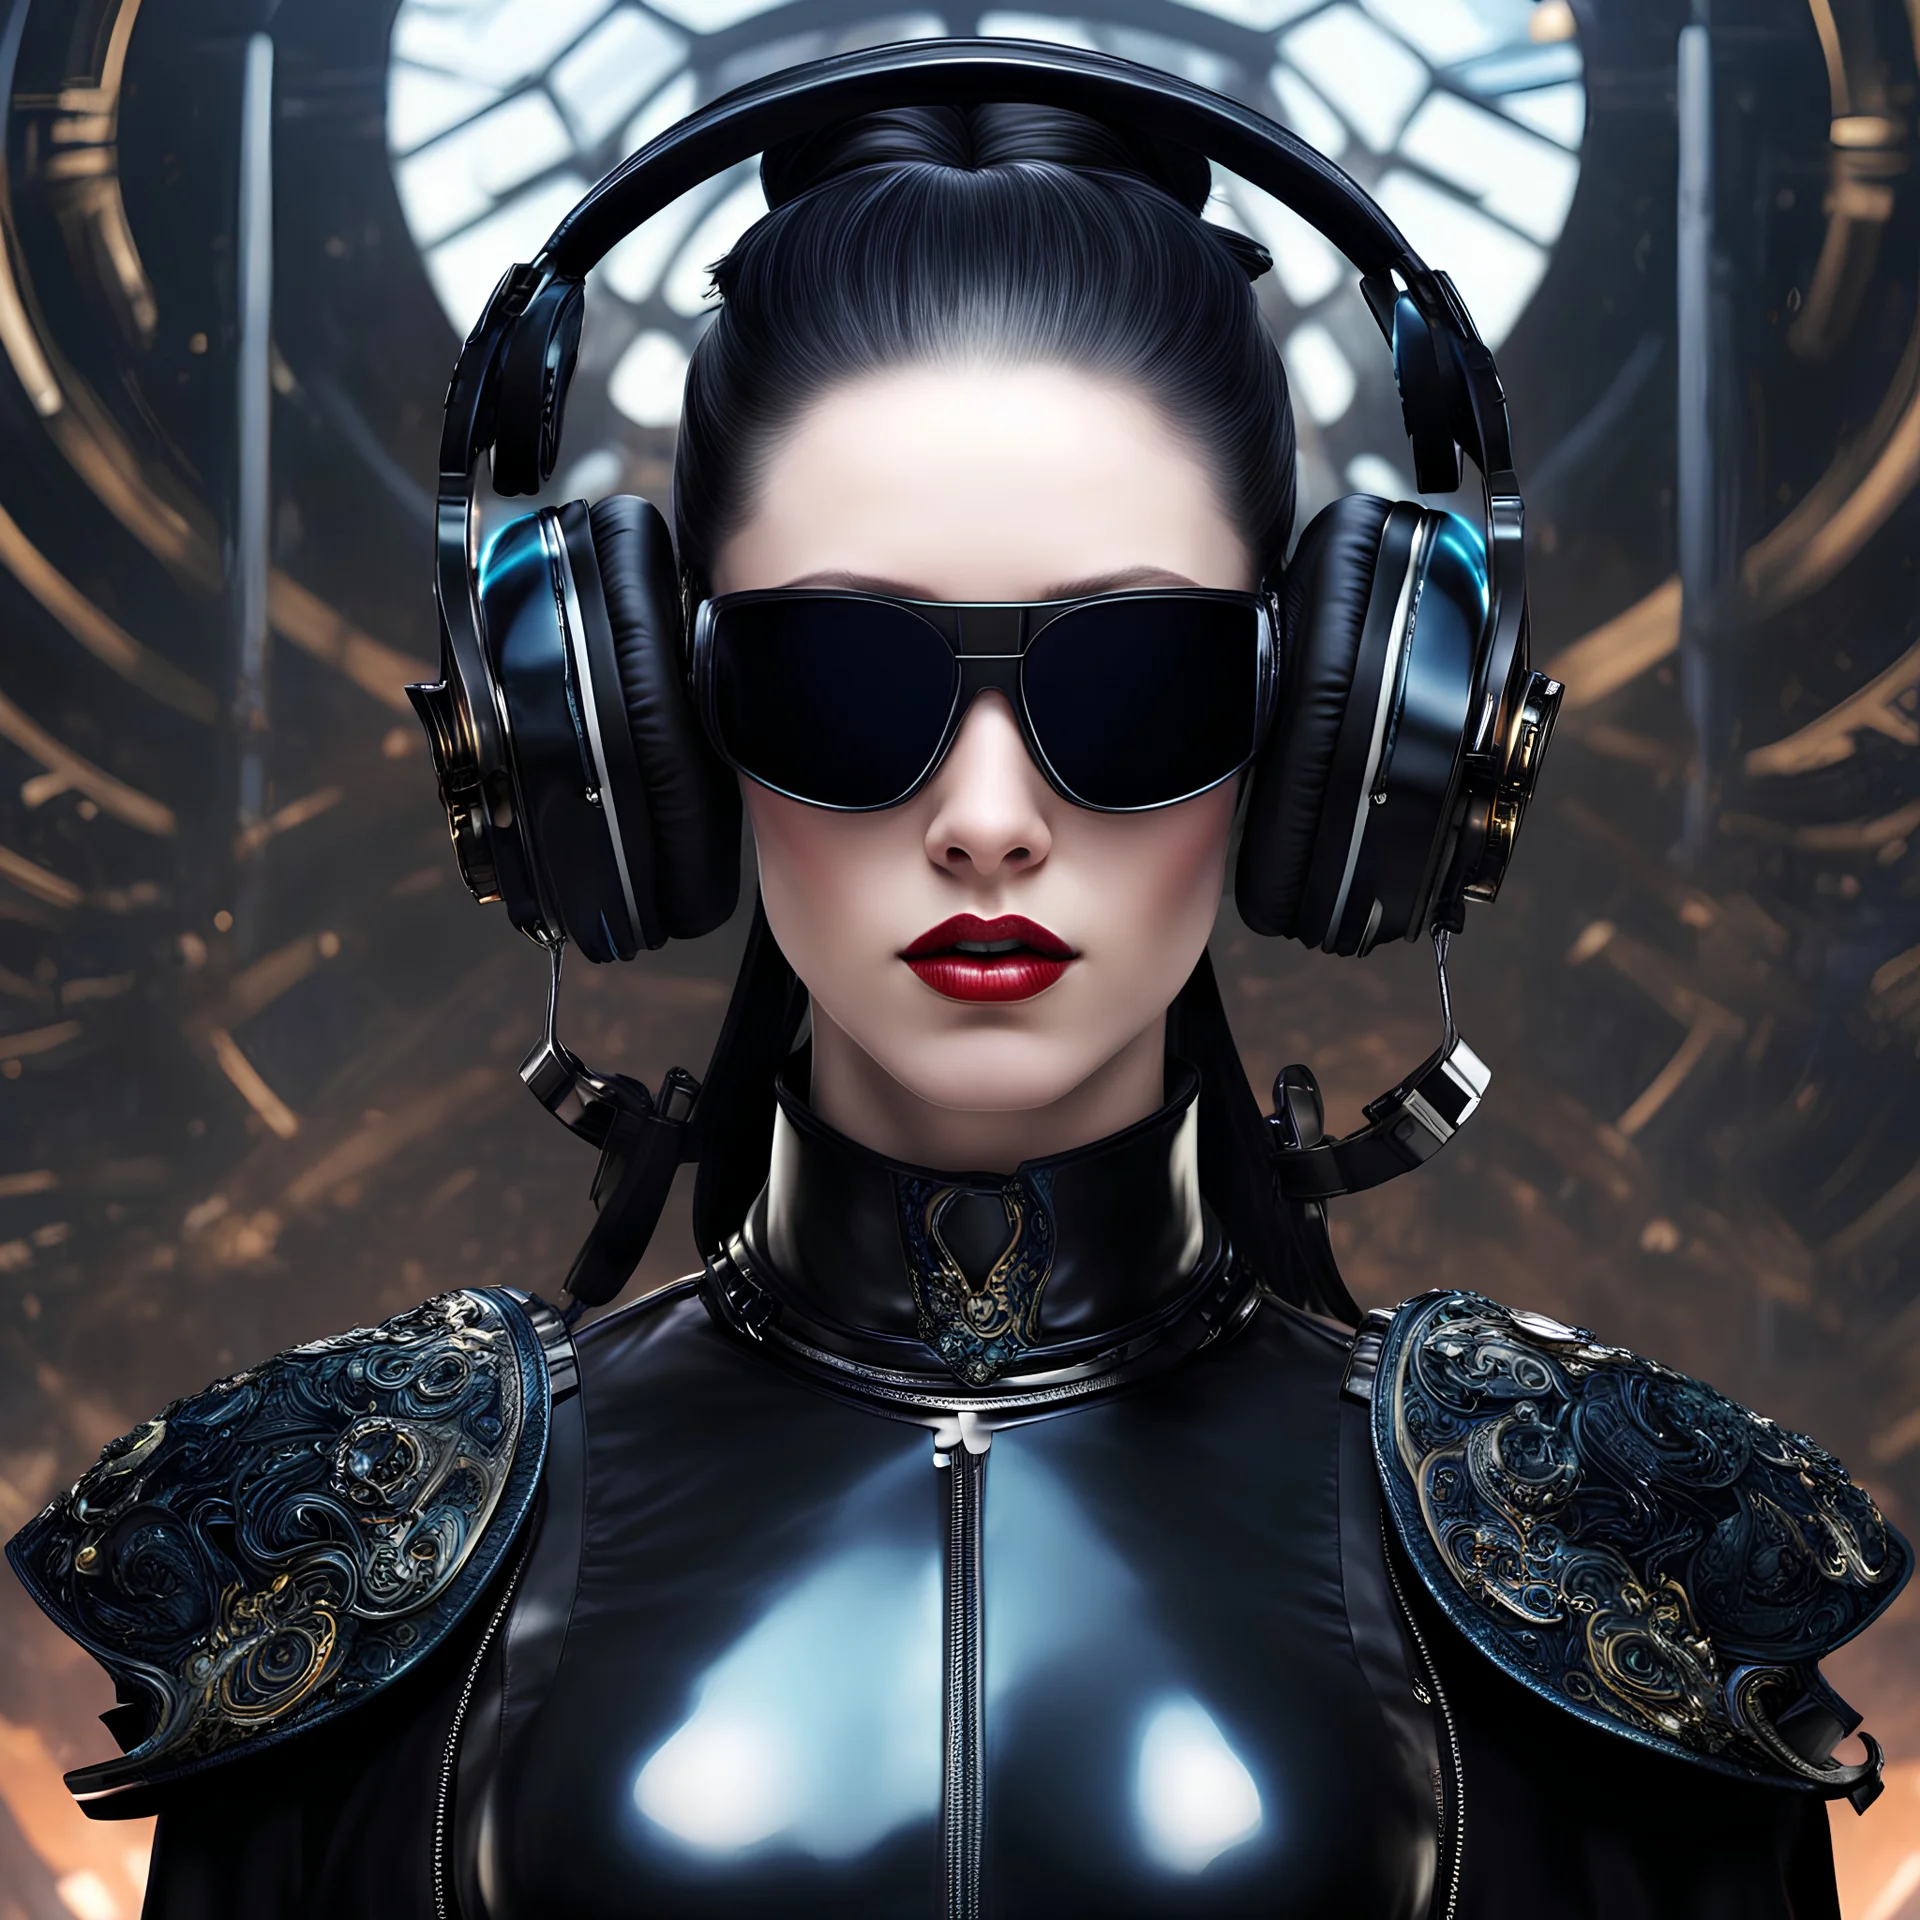 woman, female, pale skin, headphones, dark straight hair, massive ponytail, bang, implants, googles sunglasses opera mask, huge cervical collar shackle, leather, vinyl+fabric lacquer wear,sci-fi, mystic, decay, oil, glitch, optical illusion, fractal, intricate, coal, ink, ash, holography, gradients, noise texture, cyber, technological, bionic, hyper realistic, high quality, high resolution, 4k, raw, iso 100, photography, fashion, lifestyle, sharp, ampir, art deco style